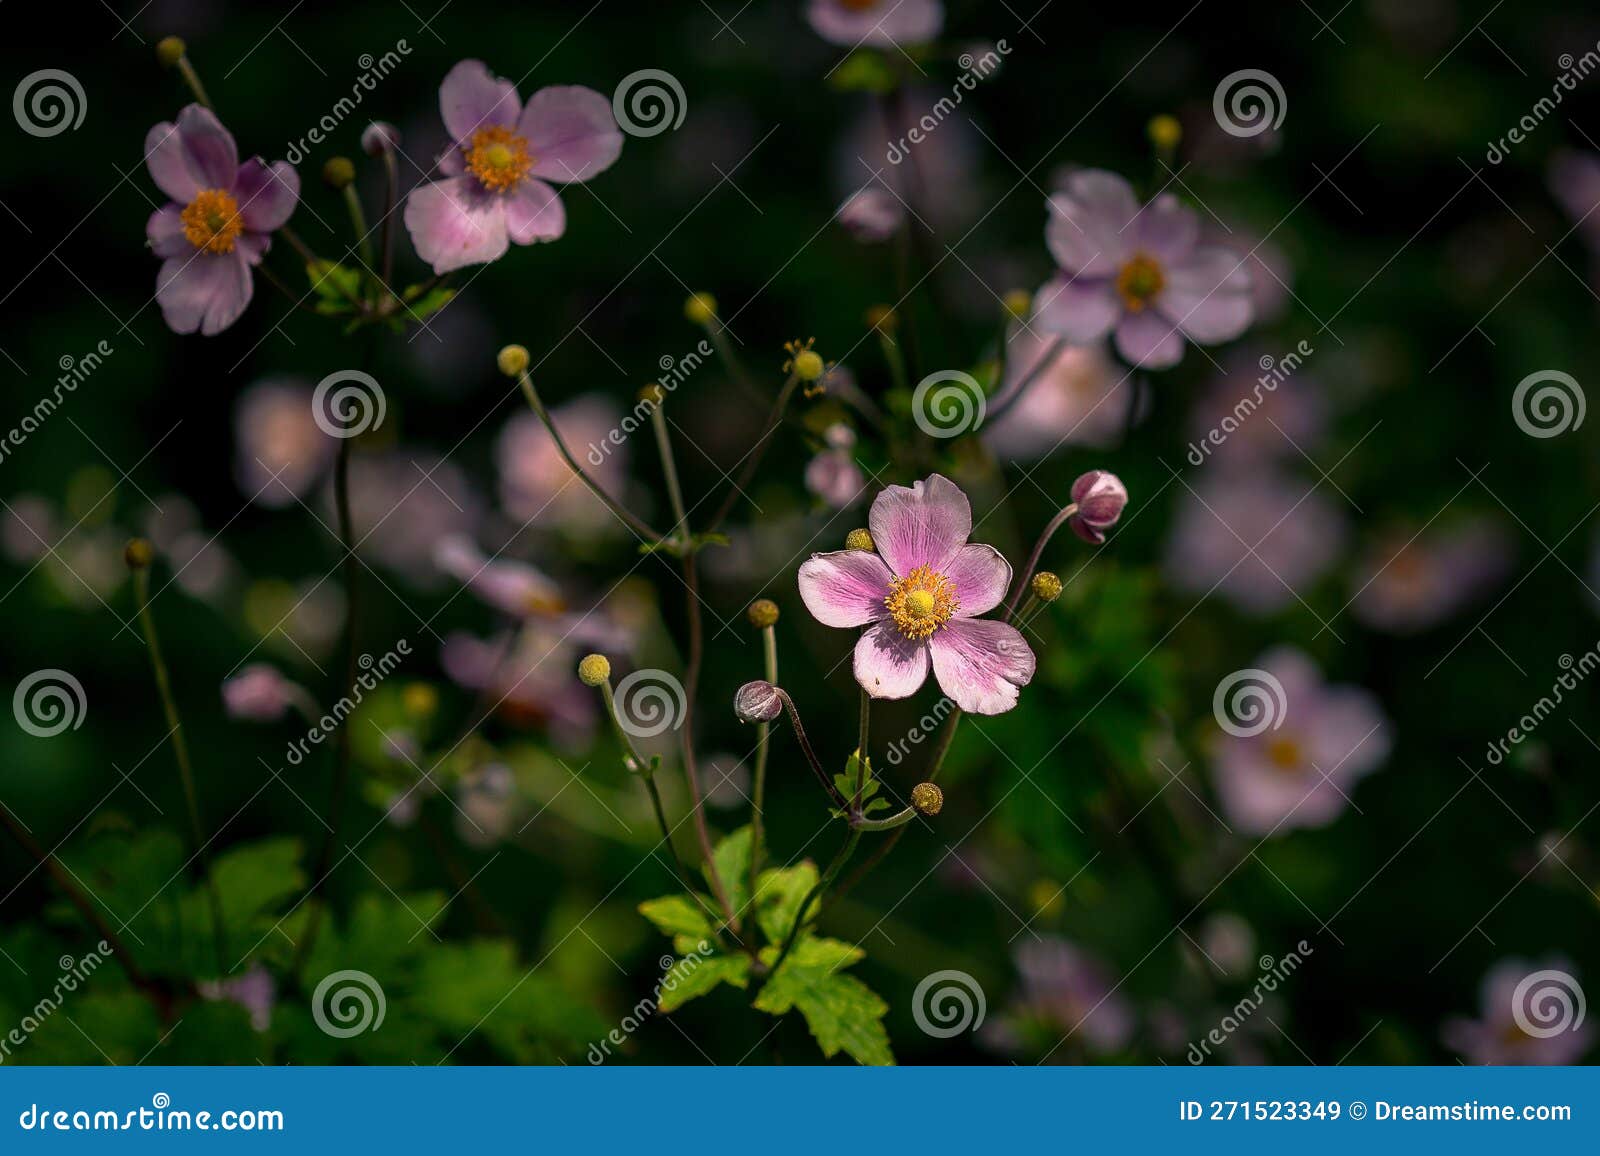 Vibrant Pink Flowers Growing in a Lush Green Planter, Planted Outdoors ...